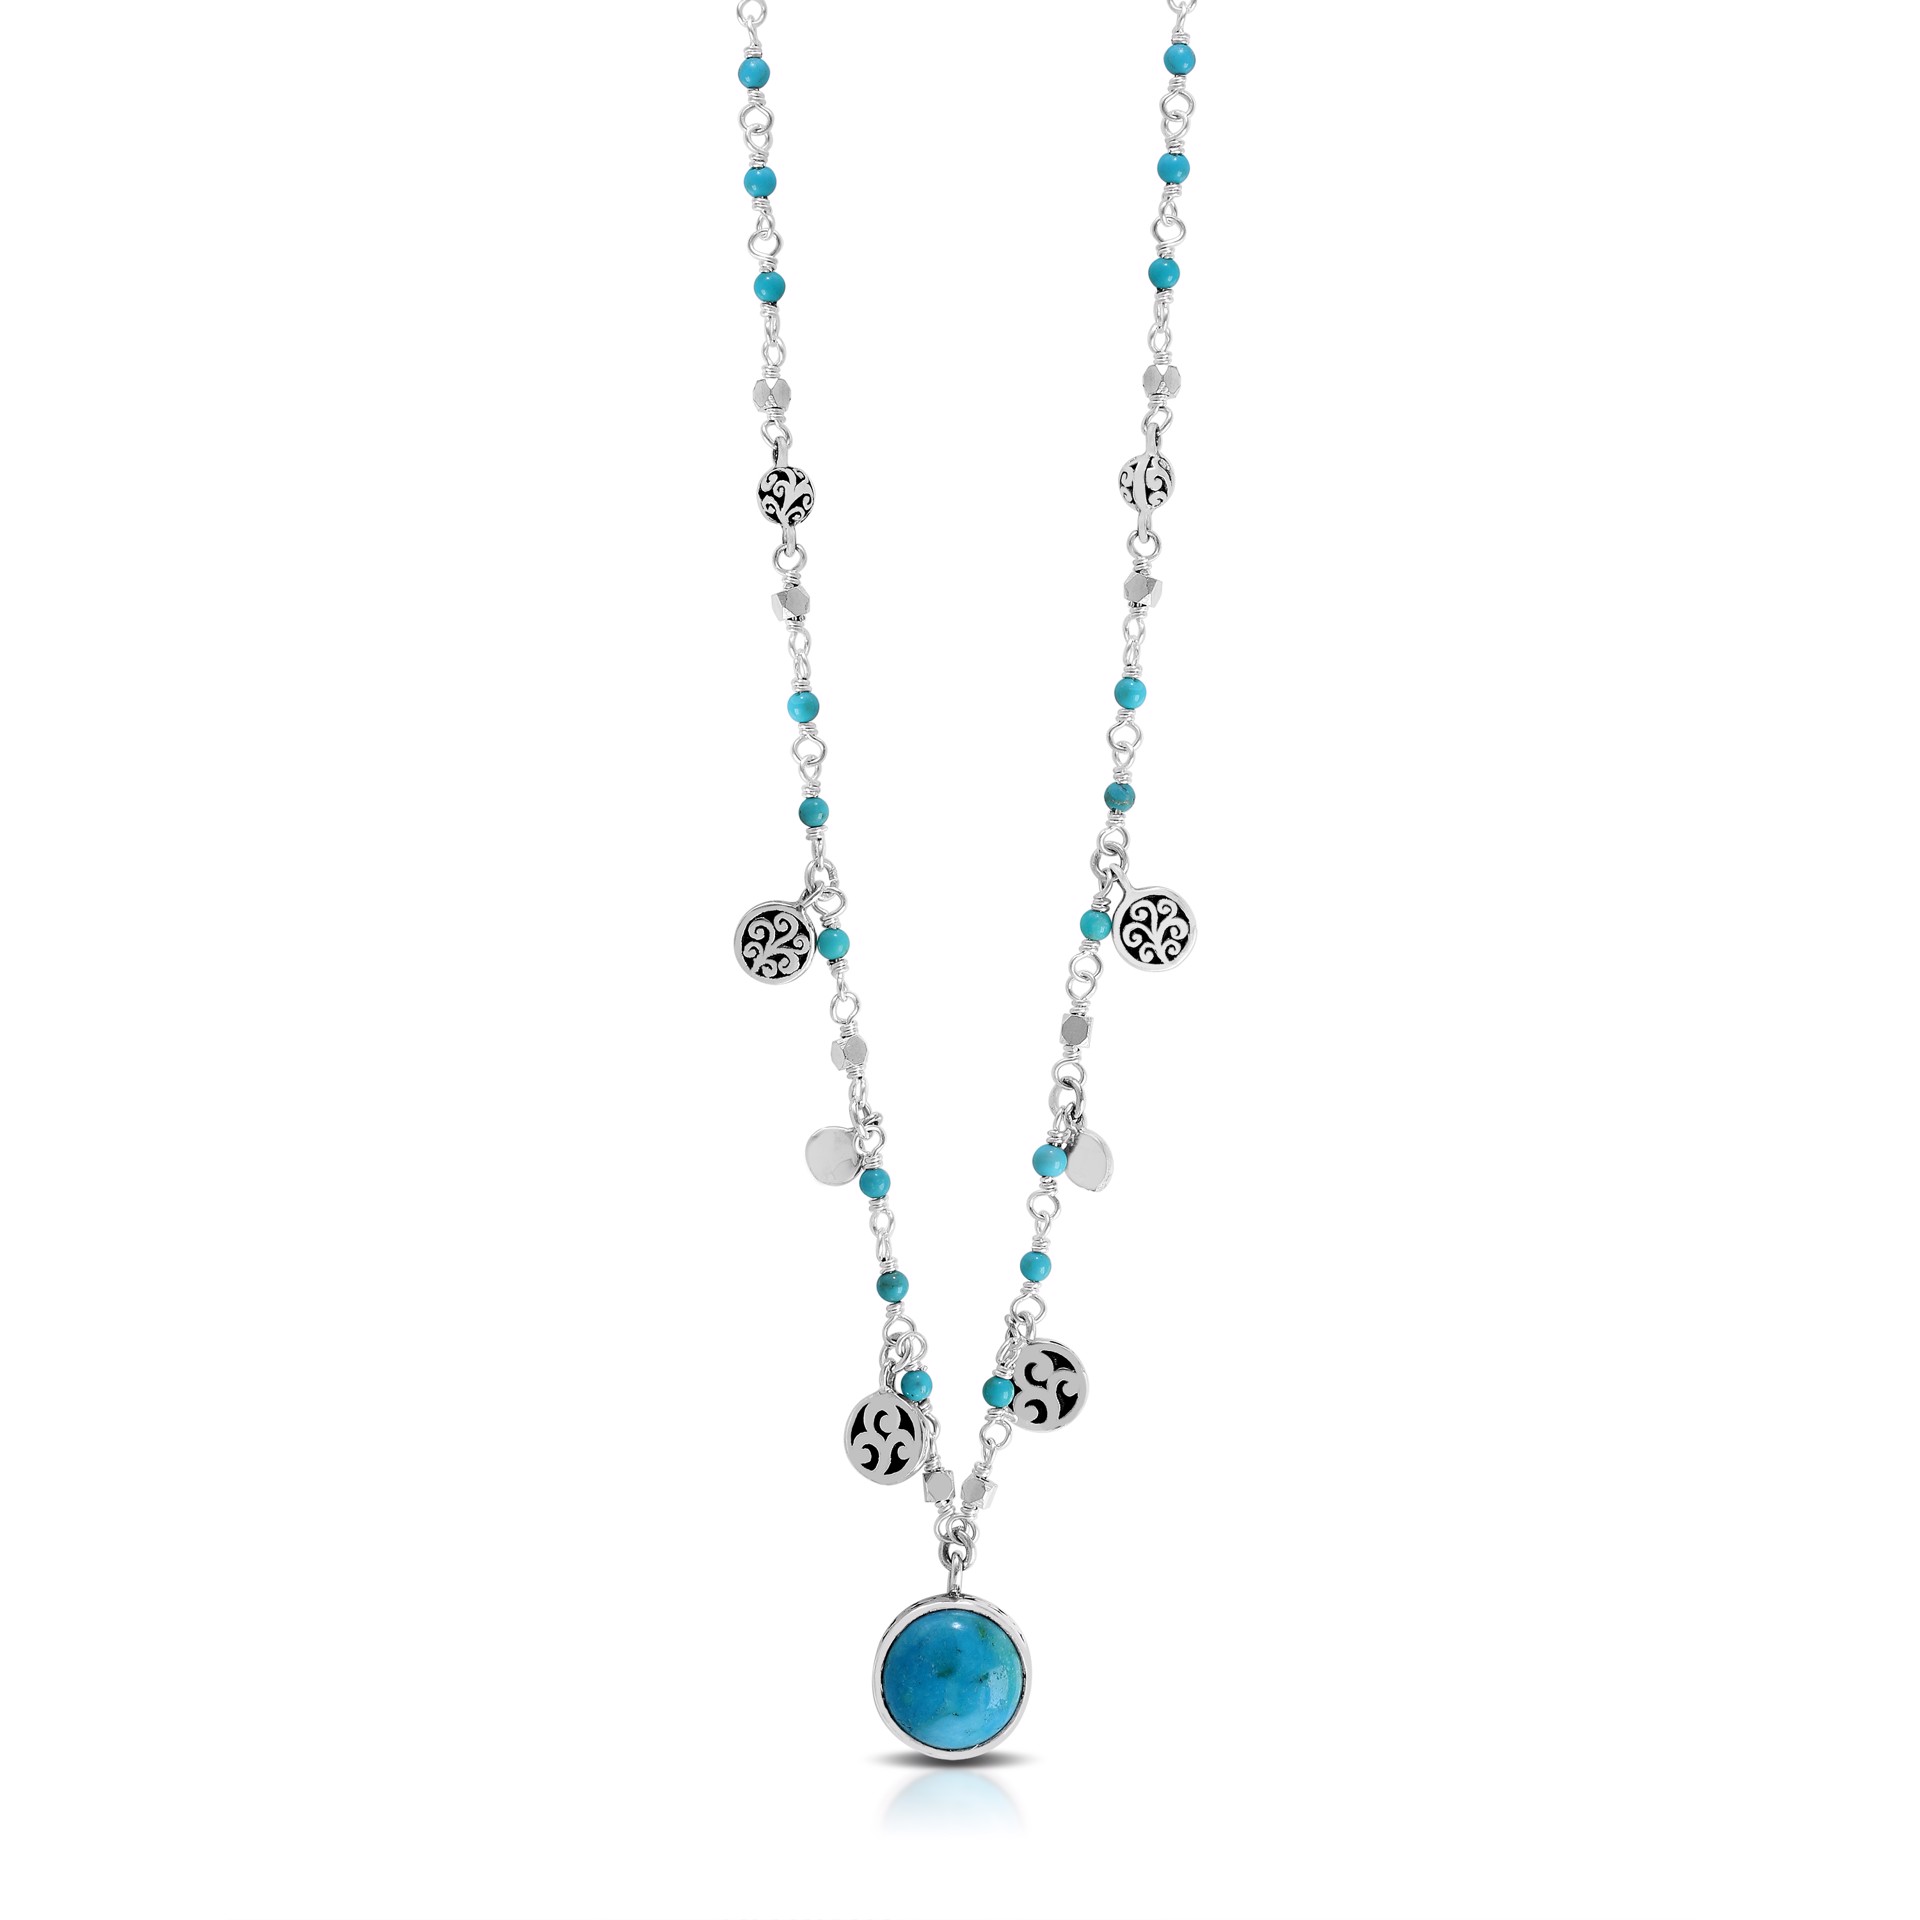 Sterling Silver and Turquoise Necklace with Signature LH Charms by Lois Hill